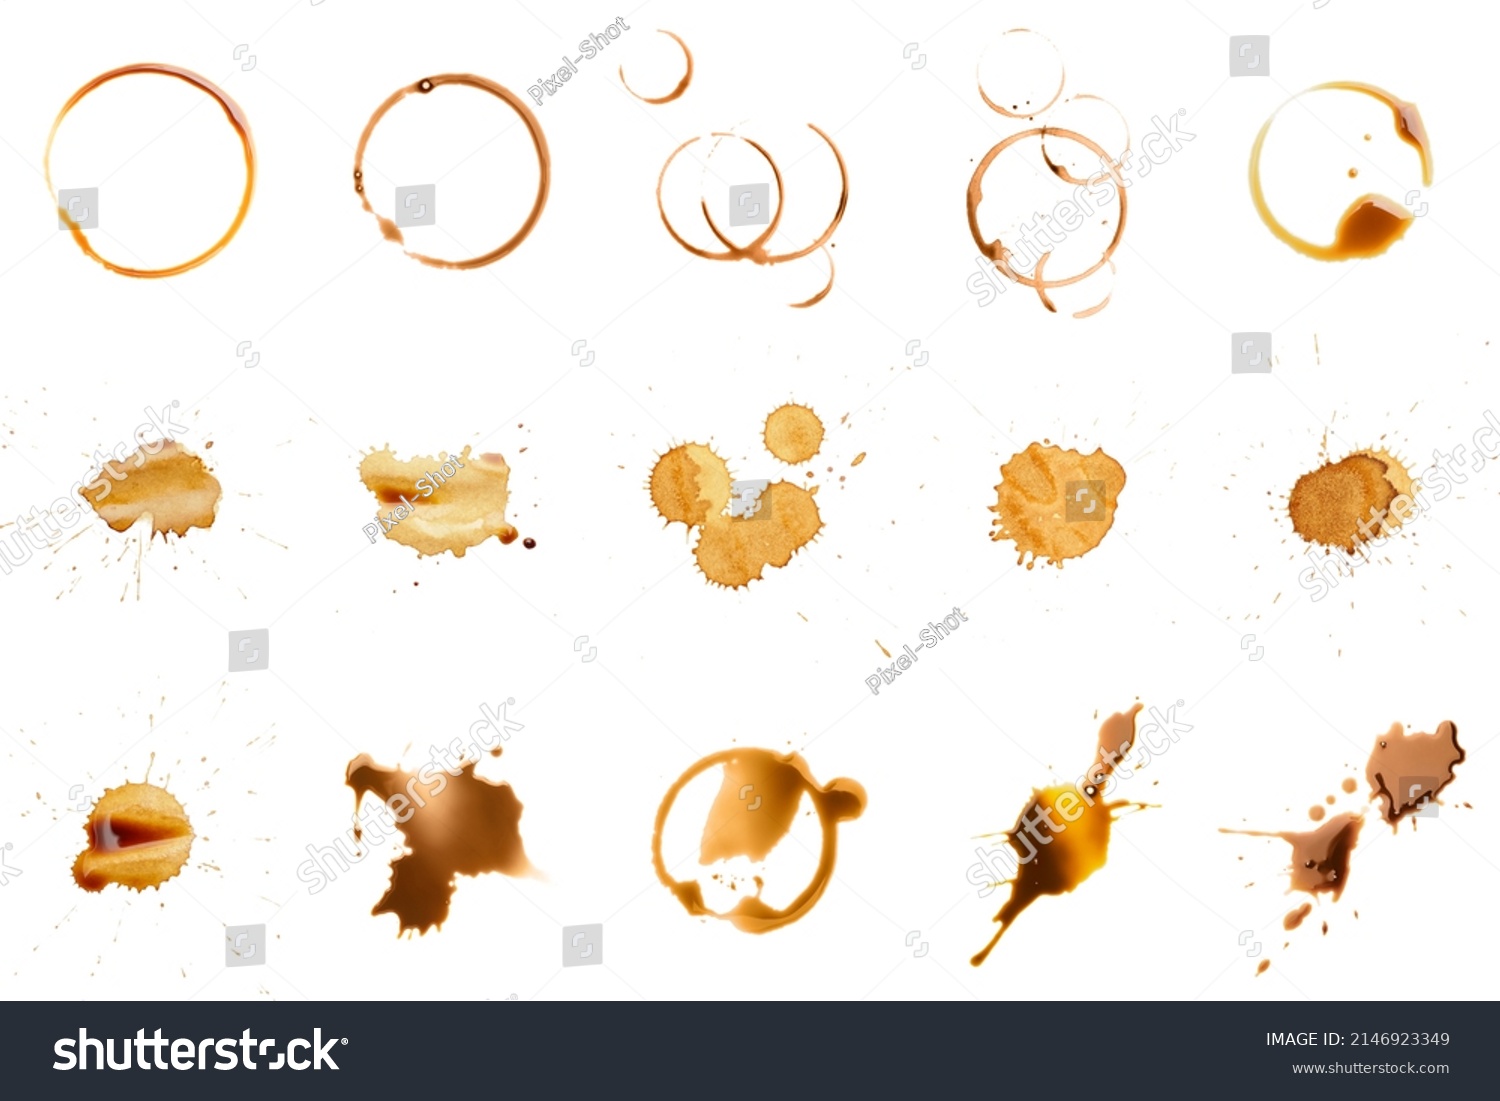 Set of coffee drops and stains isolated on white #2146923349